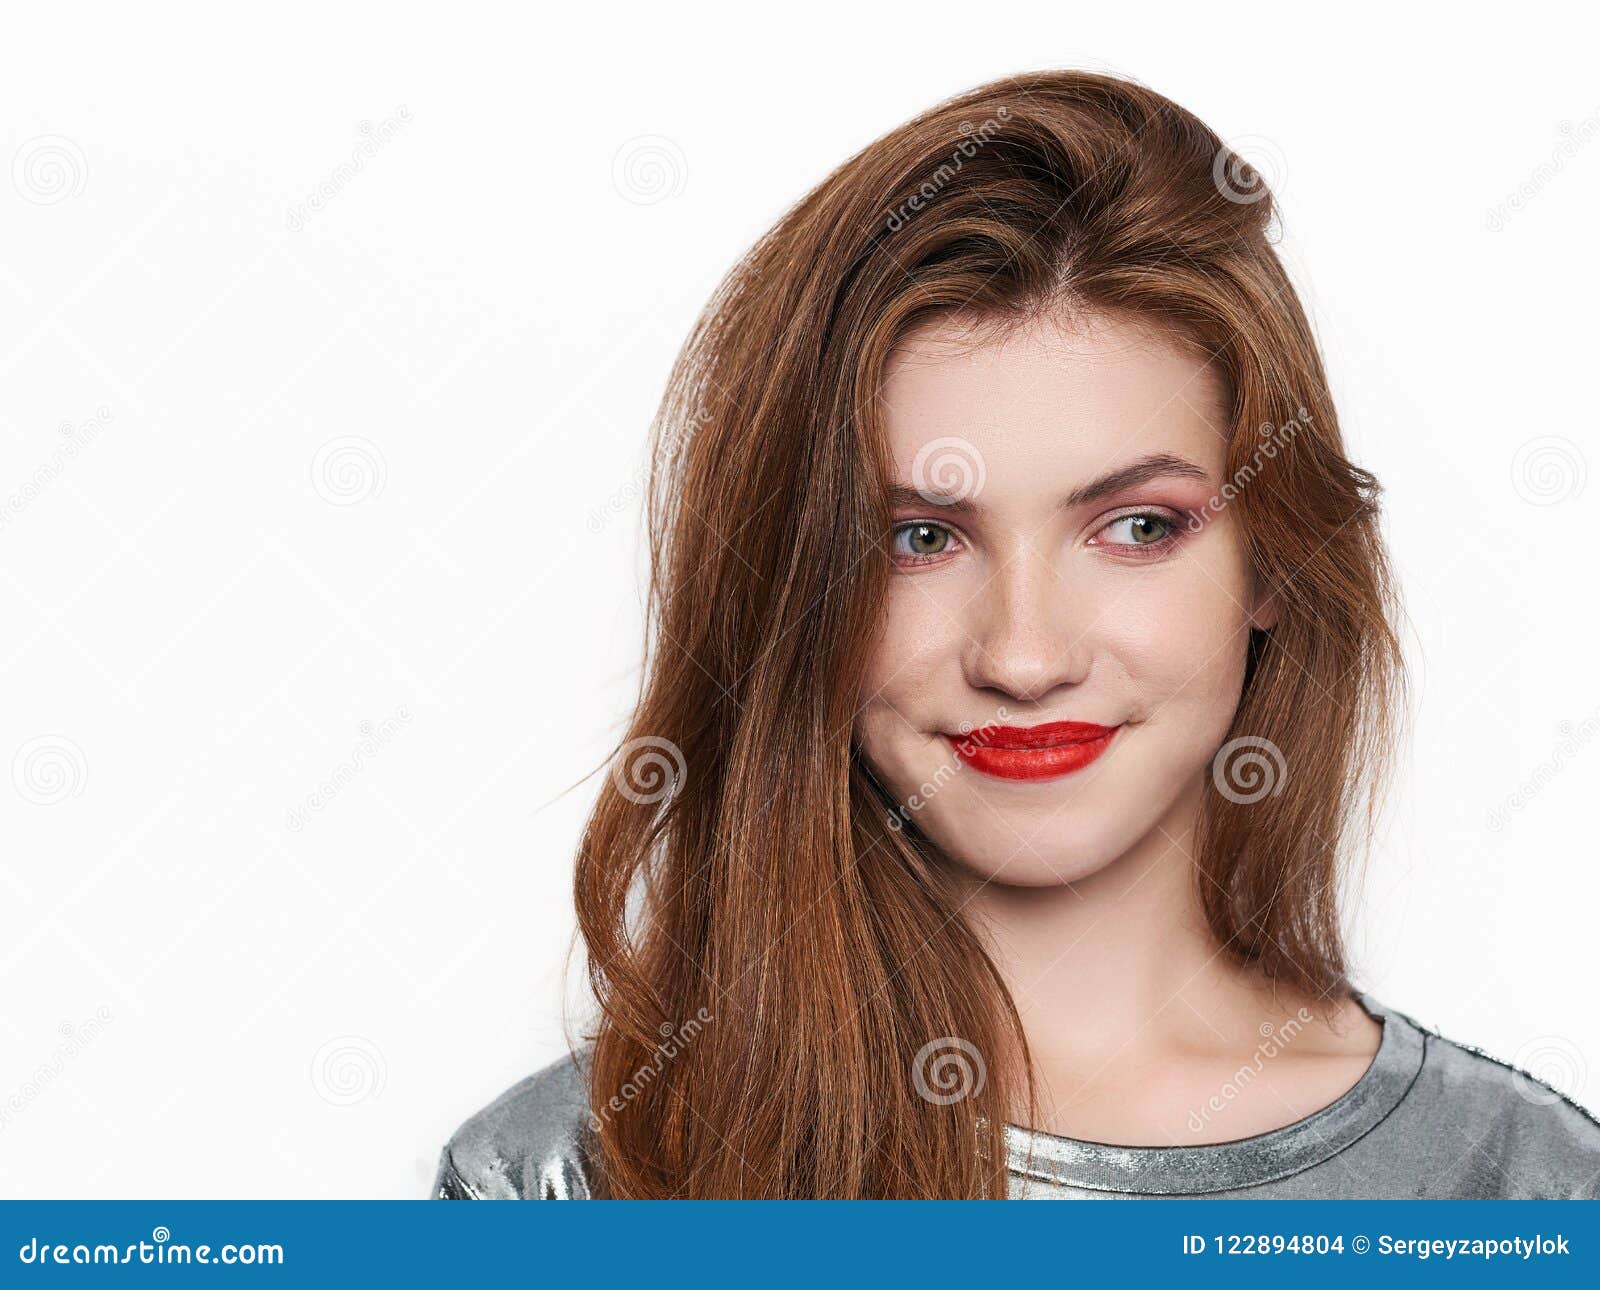 Headshot of Young Beautiful Excited Woman with Gorgeous Natural Red ...